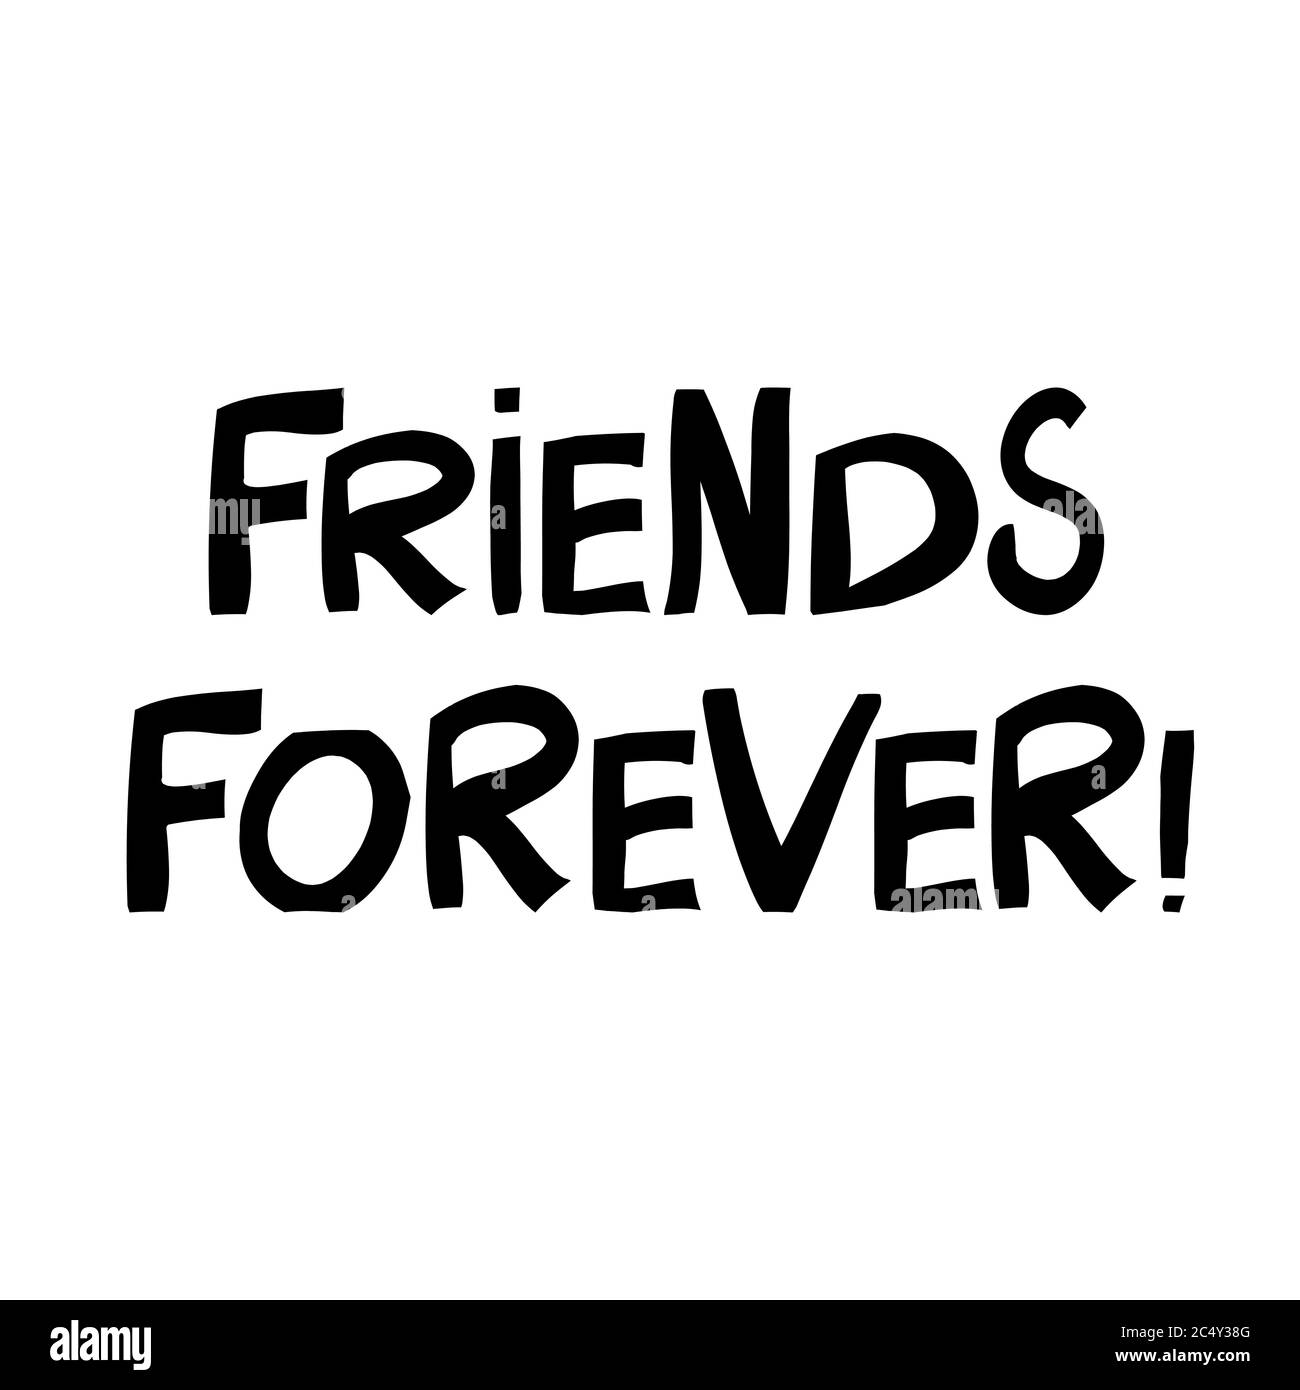 Friends forever Stock Vector Images - Alamy